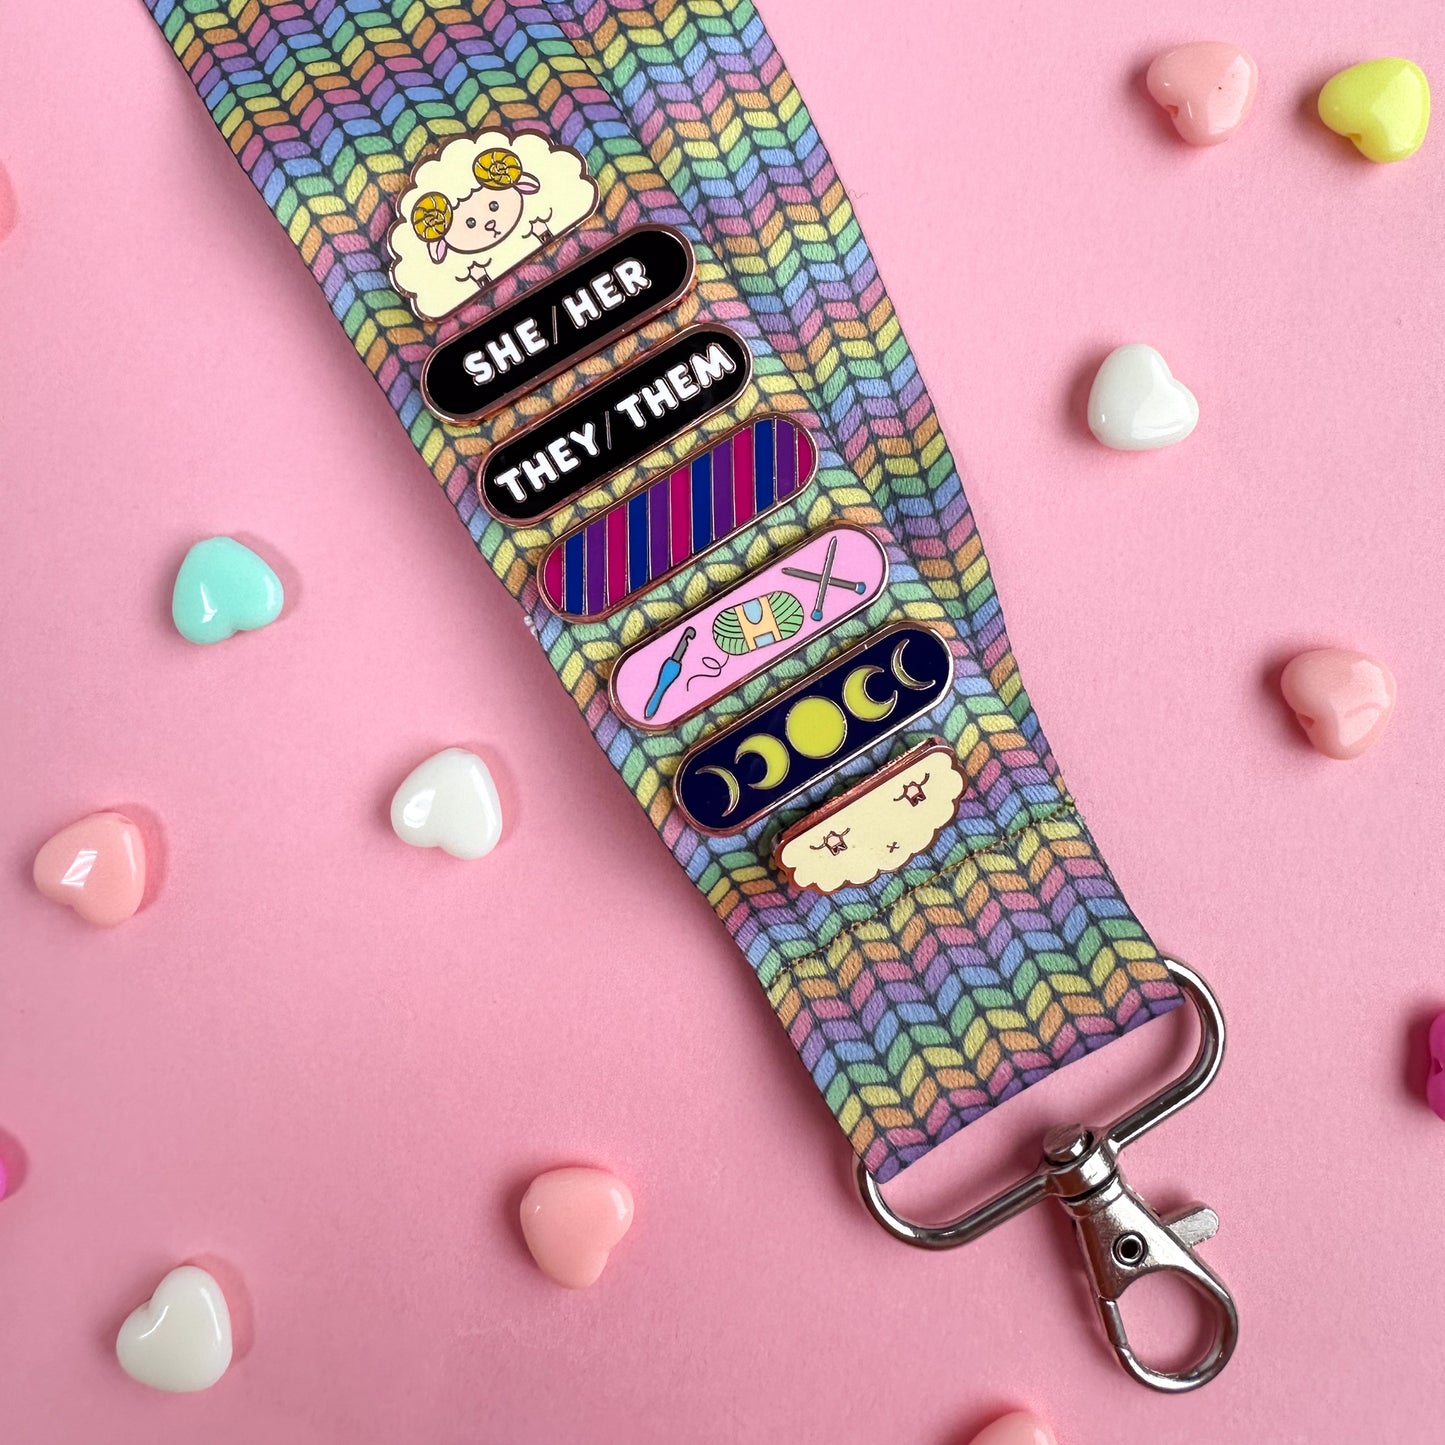 A woven lanyard with a pastel rainbow stockinette stitch graphic printed on it with a silver metal lobster claw clasp at the bottom. The lanyard has a Sheep Pride Pal pin displayed on it with She/Her and They/Them pronoun plaques stacked with a Bi Pride Plaque, Crafts Personality Plaque, and Moon Phases Personality Plaque. 